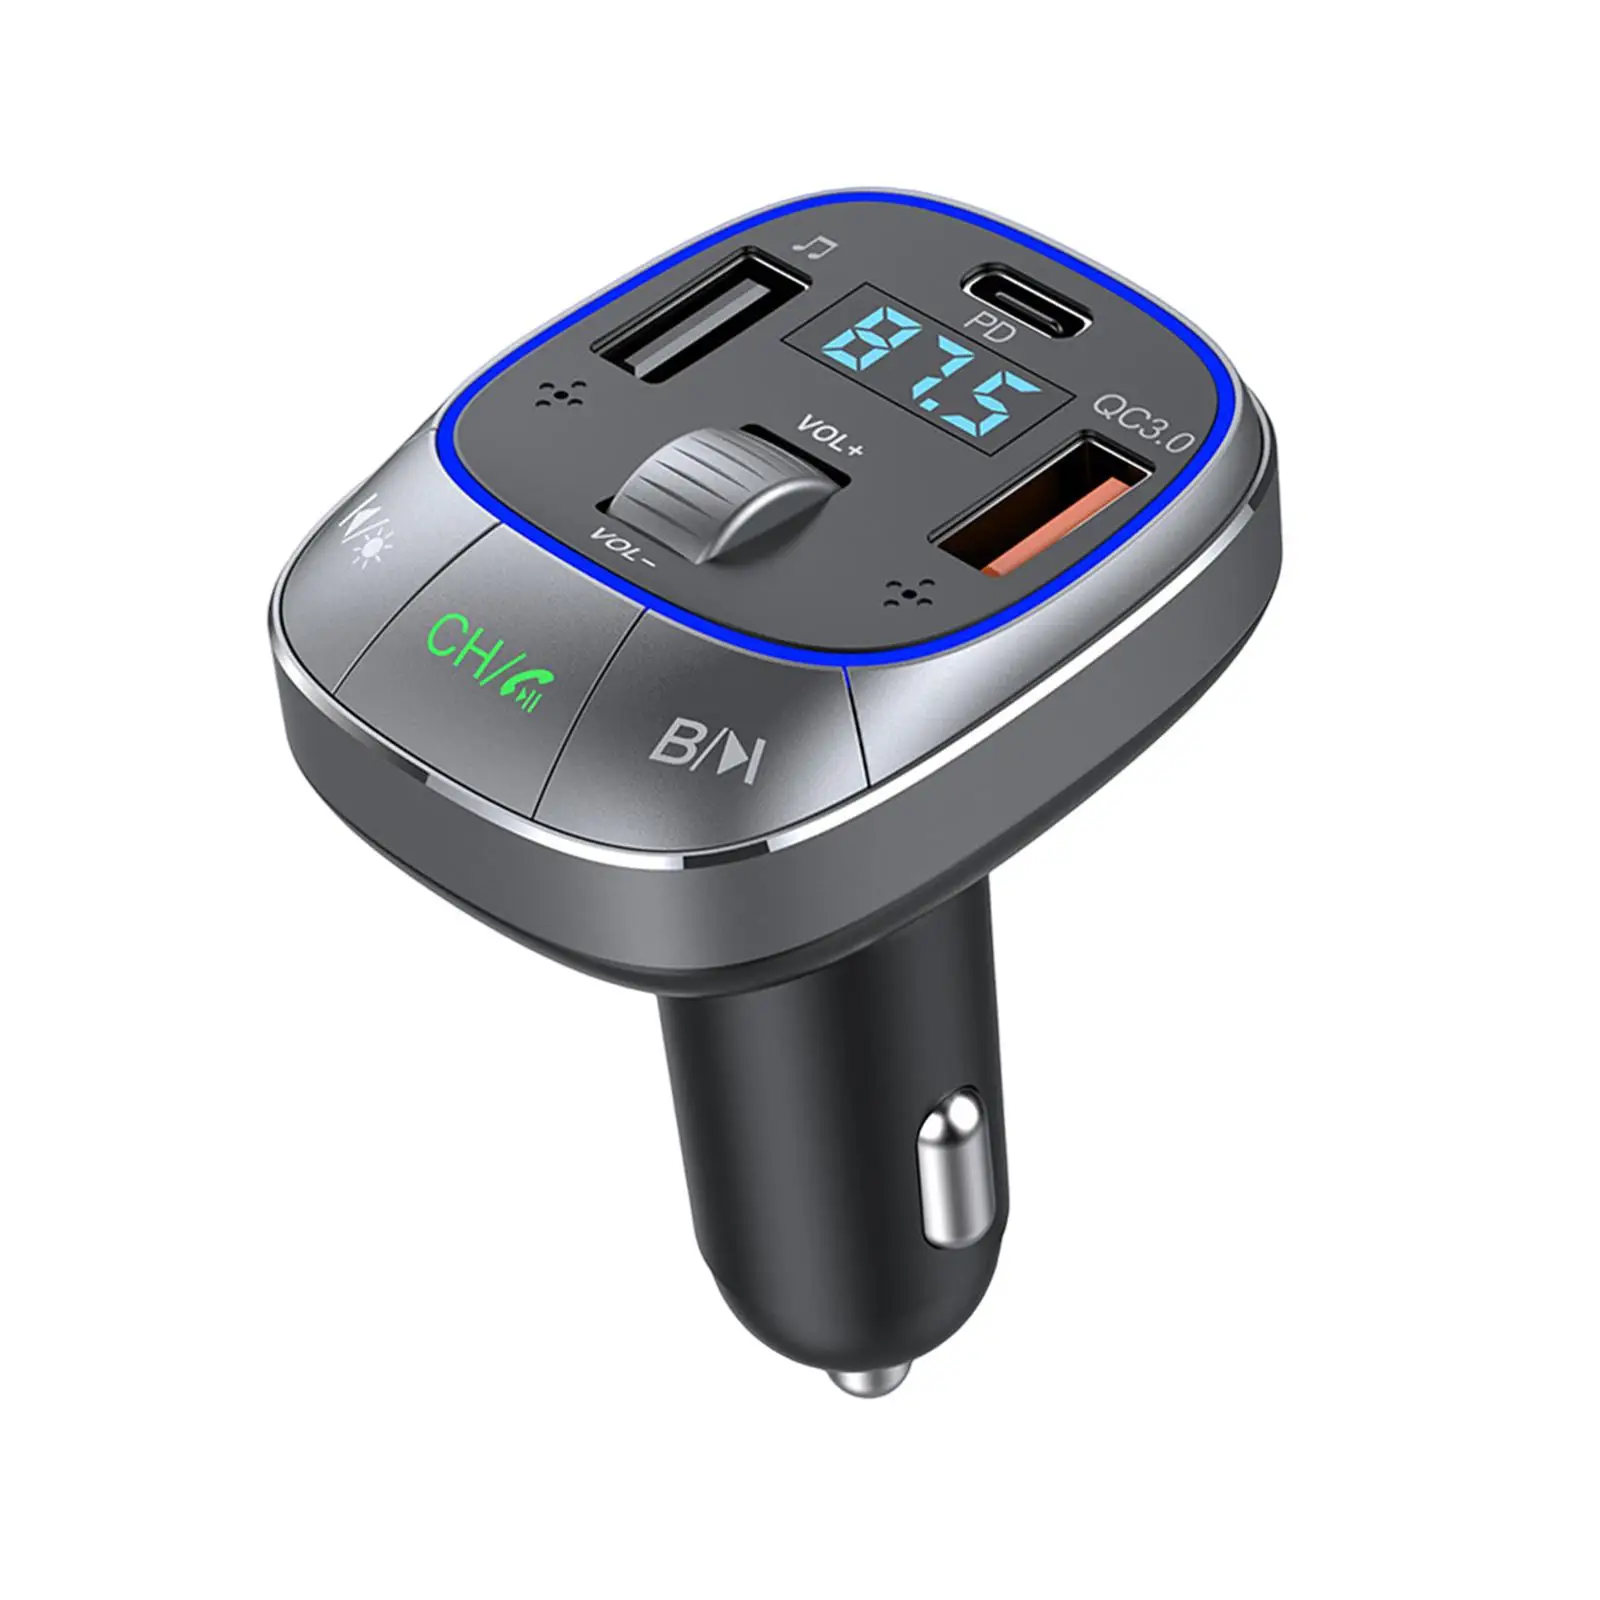 Bluetooth Car Adapter Low Power Consumption Fast Charger Handsfree Call V5.0